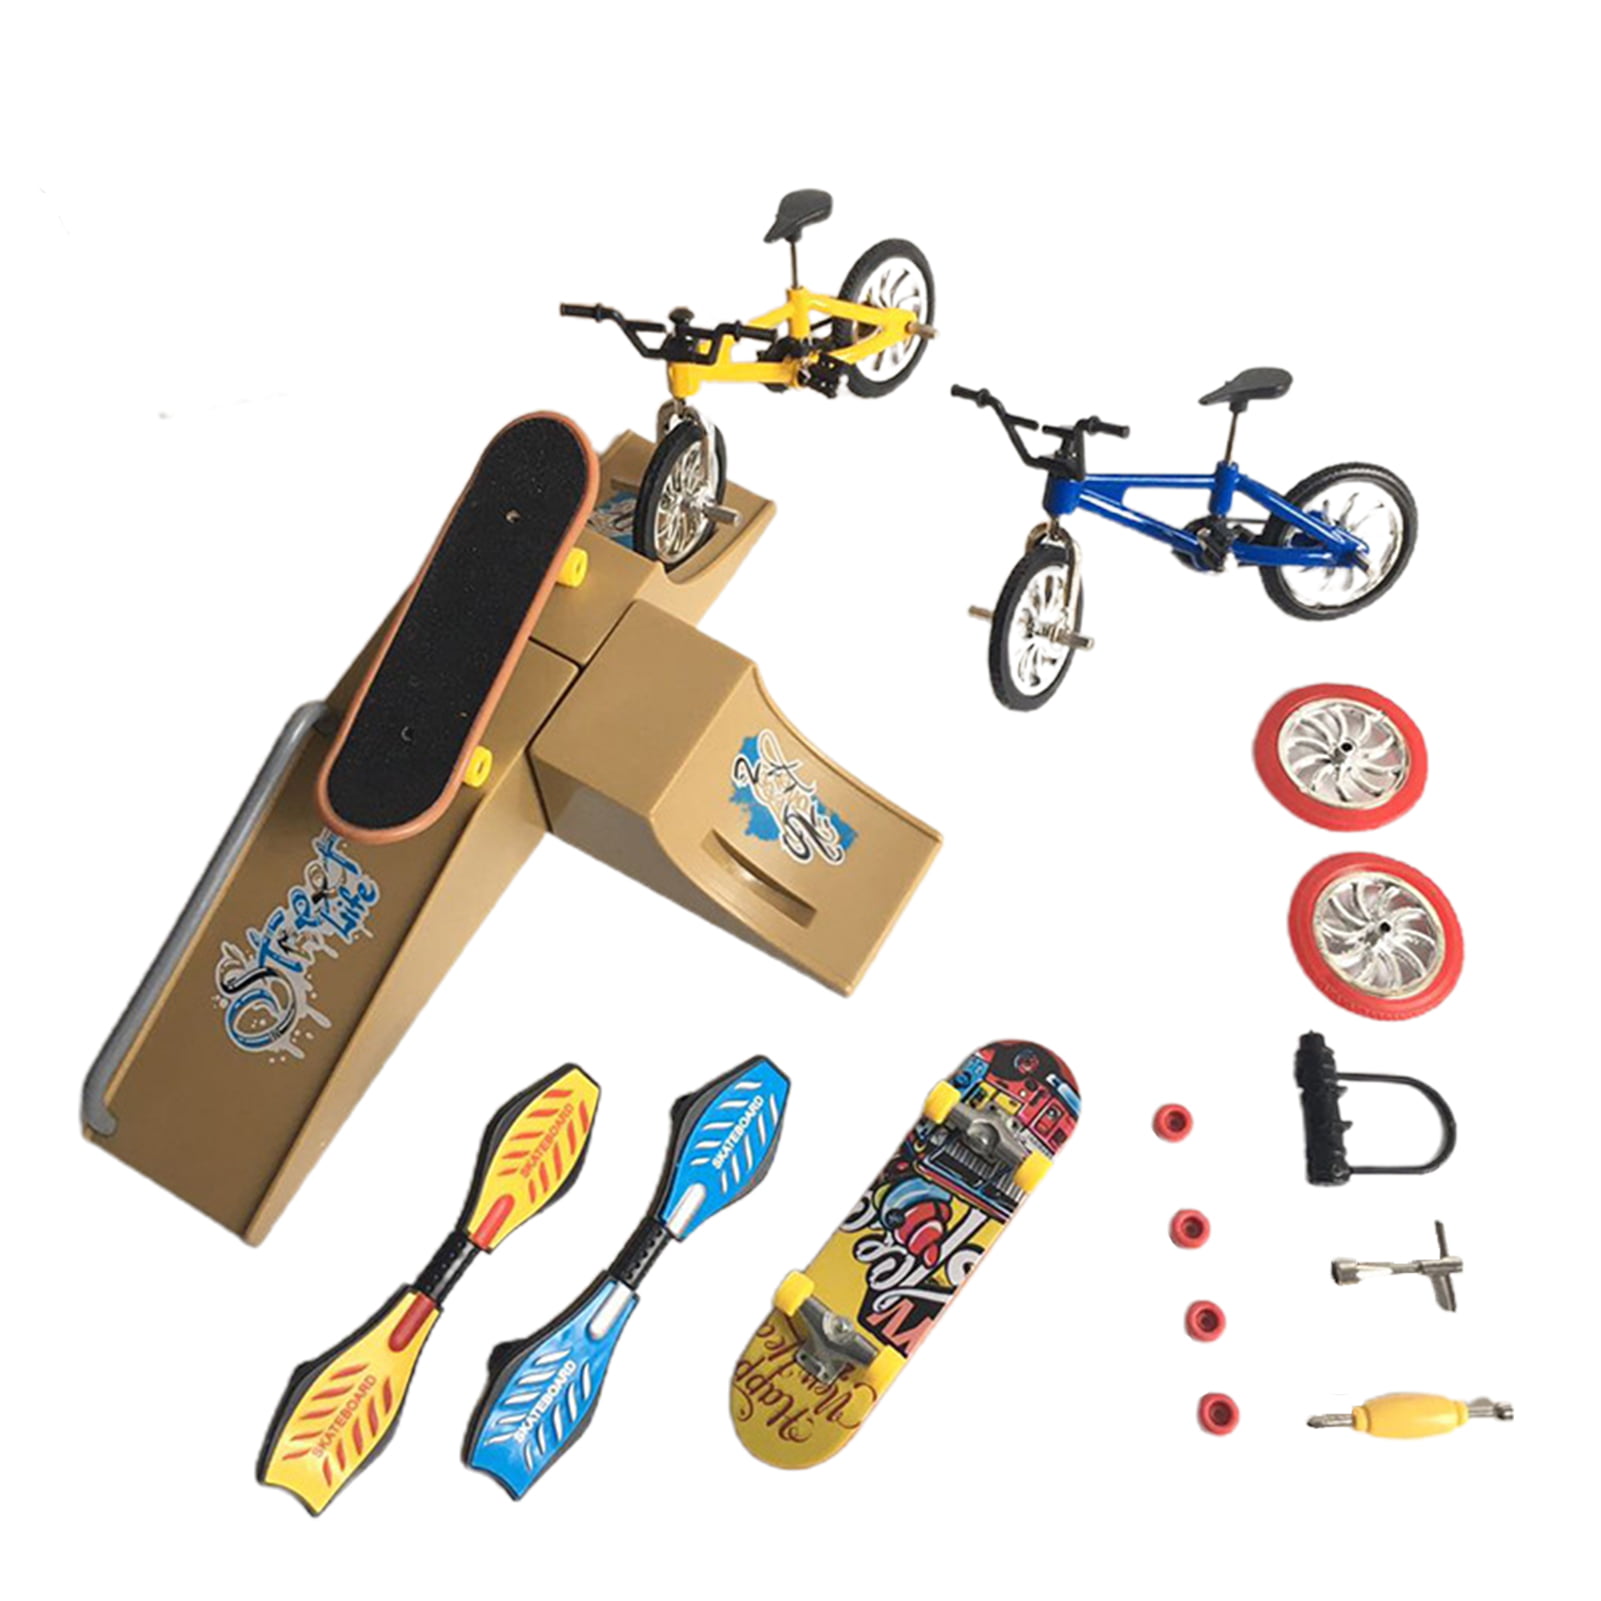 Finger Bicycle Finger Skateboard Toy Bicycle+Skateboard+Vitality Board+Scooter 